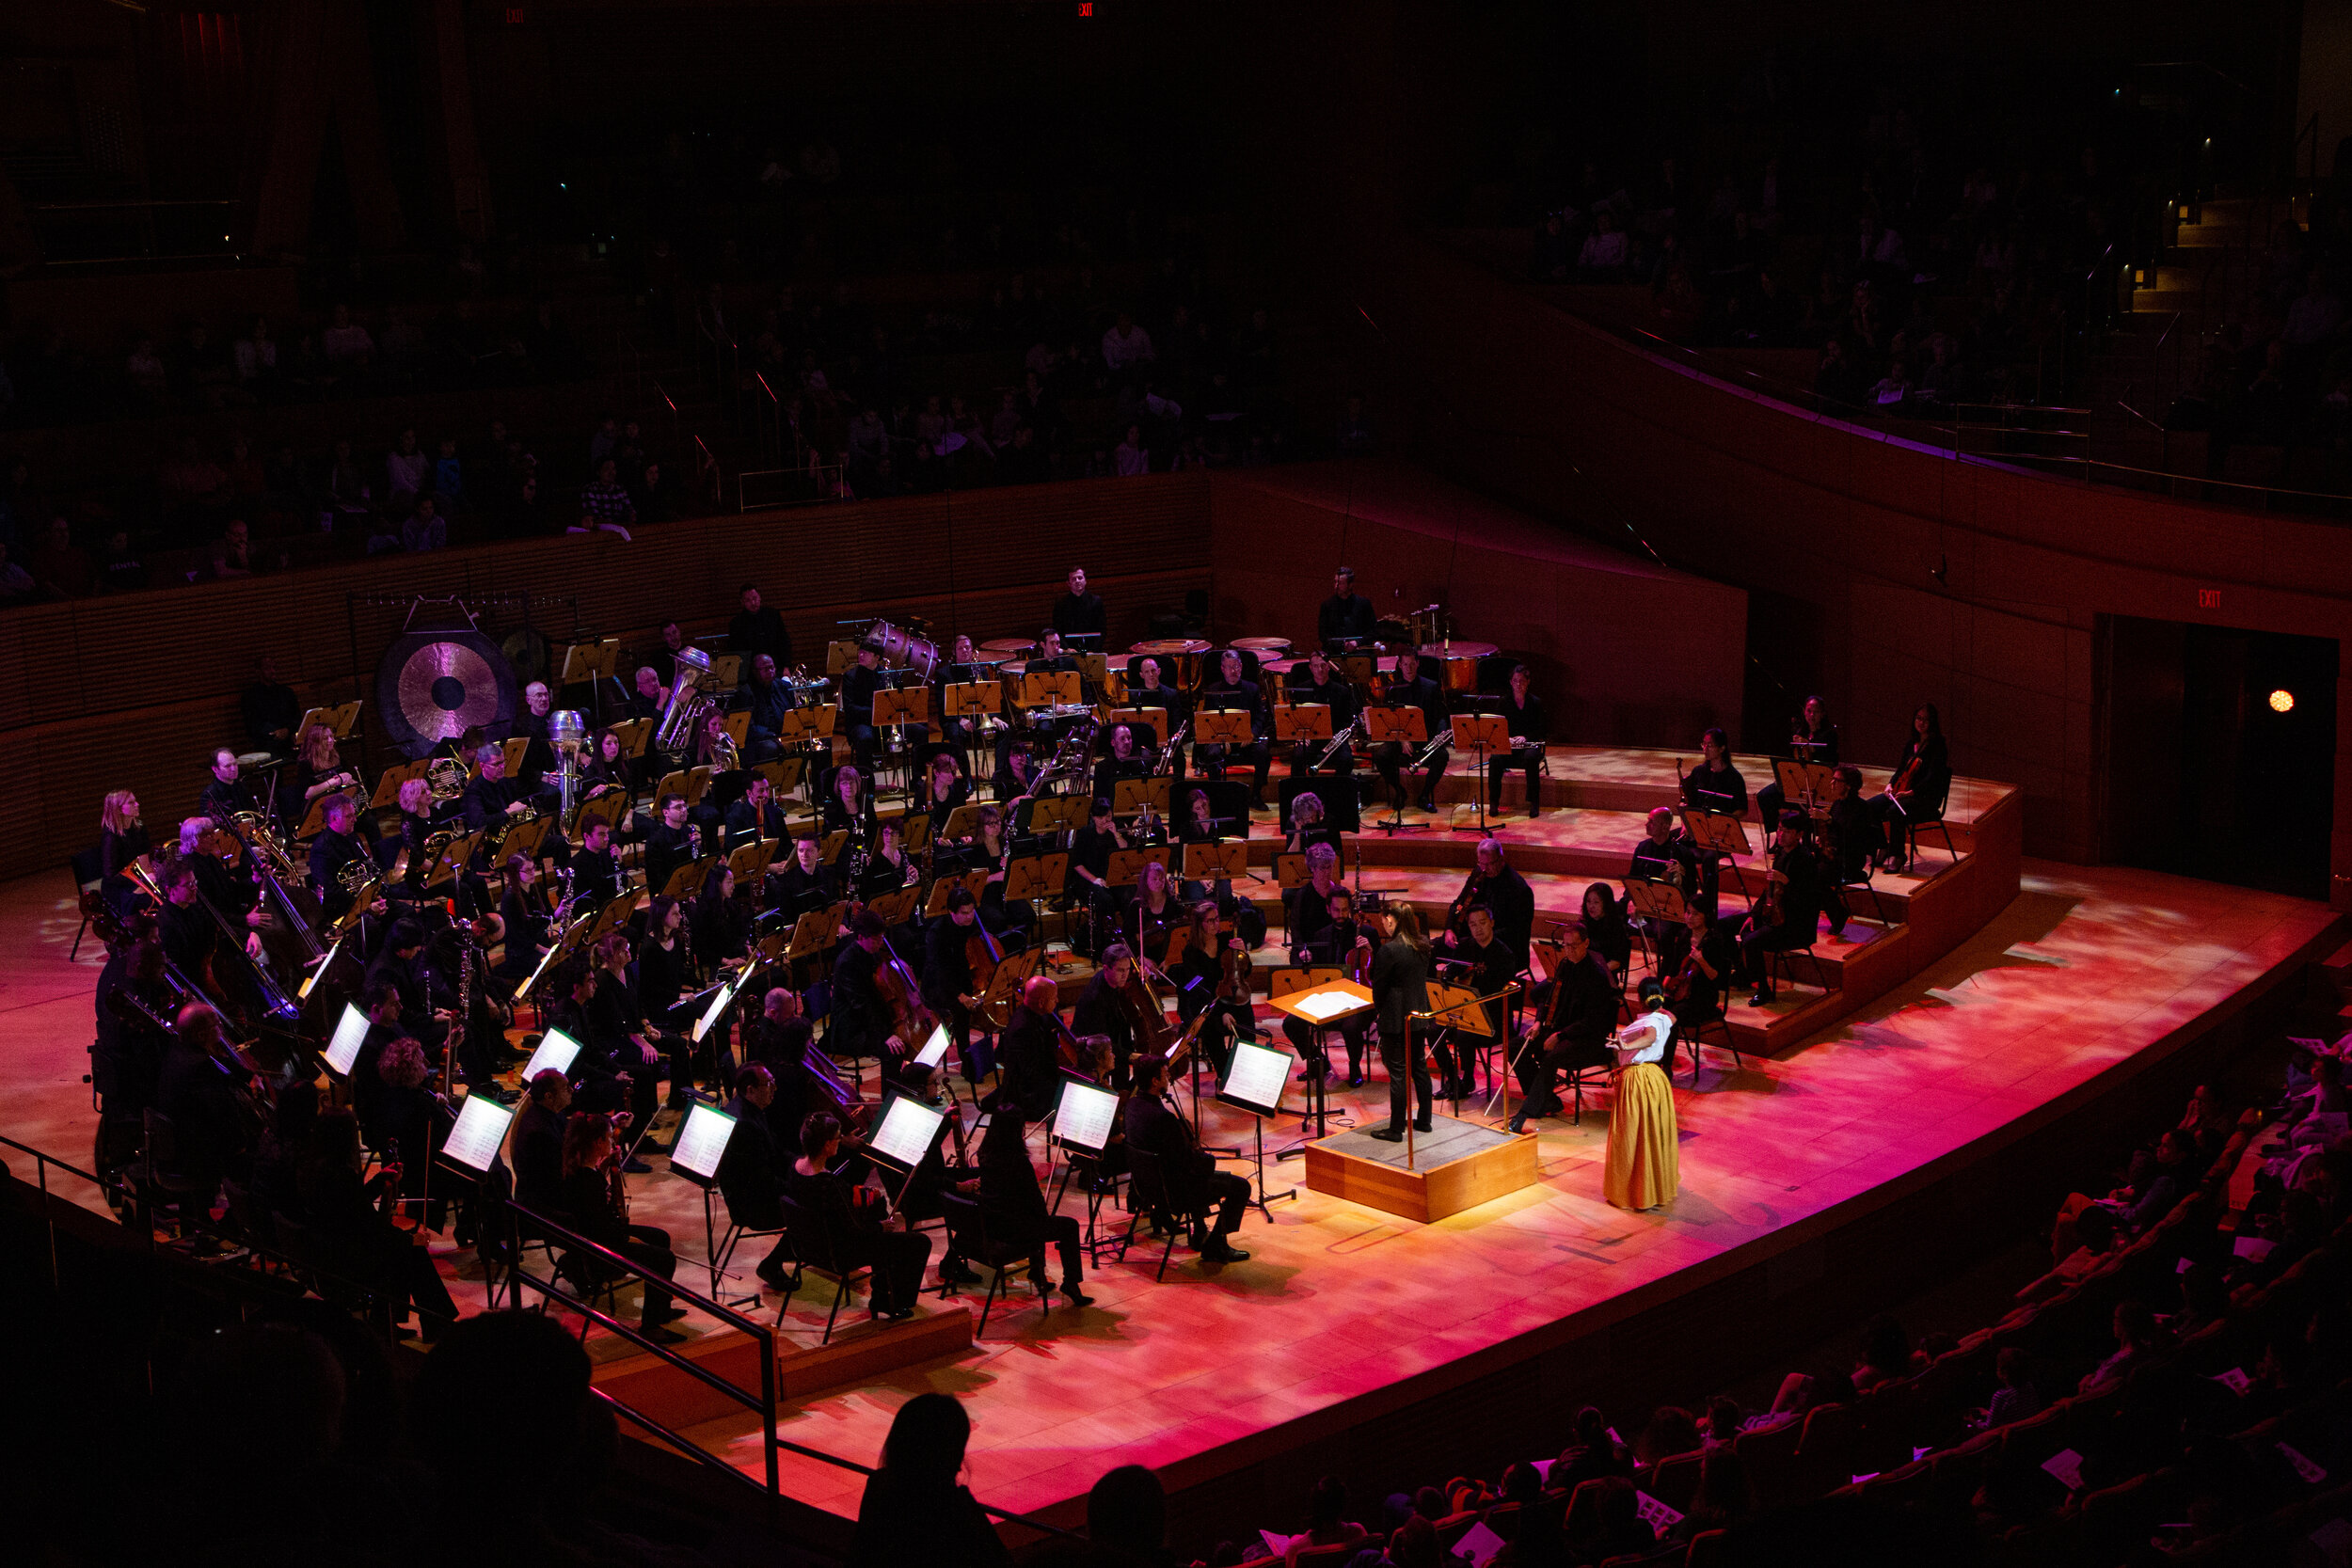 Bhavana performing solo to Los Angeles Philharmonic Orchestra At Disney Hall